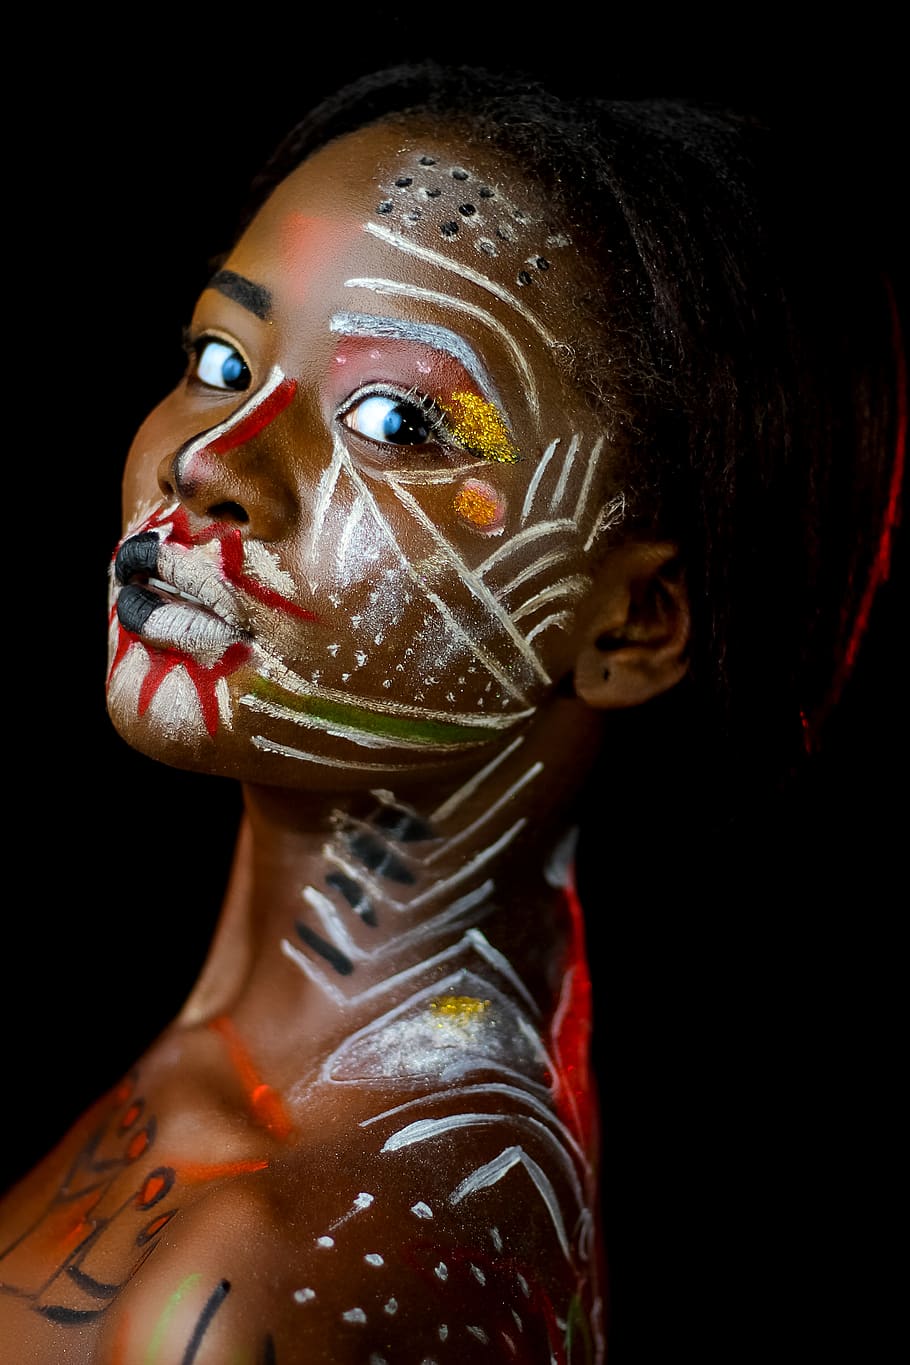 Woman with Face and Body Paint, art, beautiful, beauty, black background